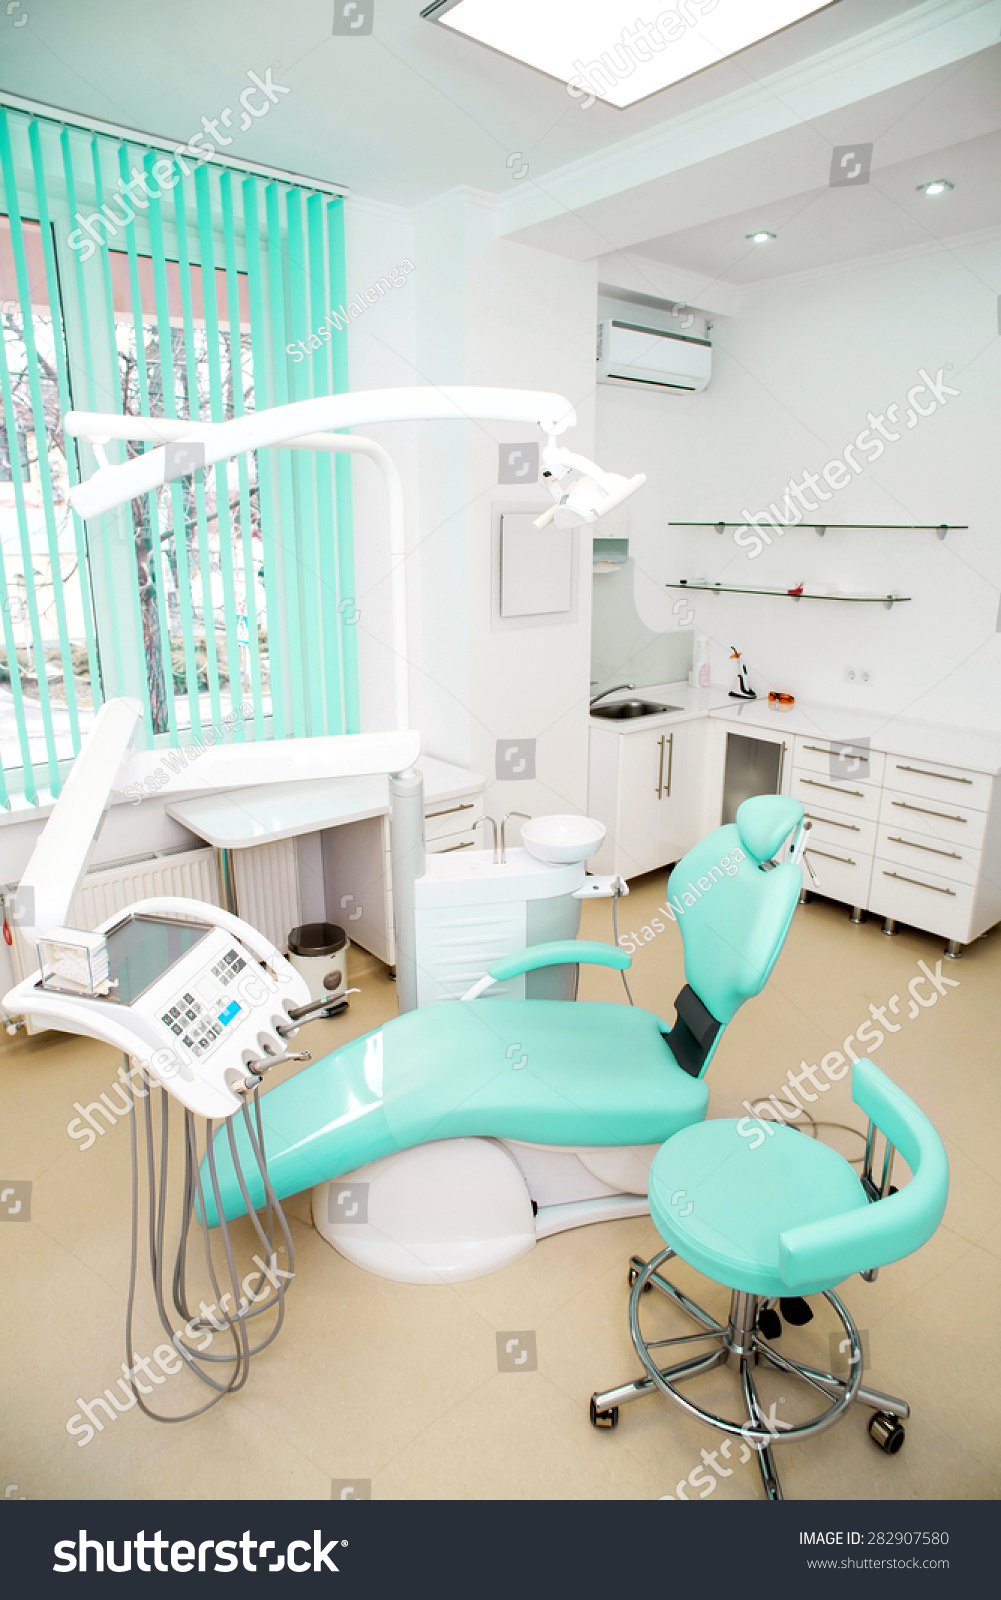 dental clinic interior design with chair and tools. #282907580